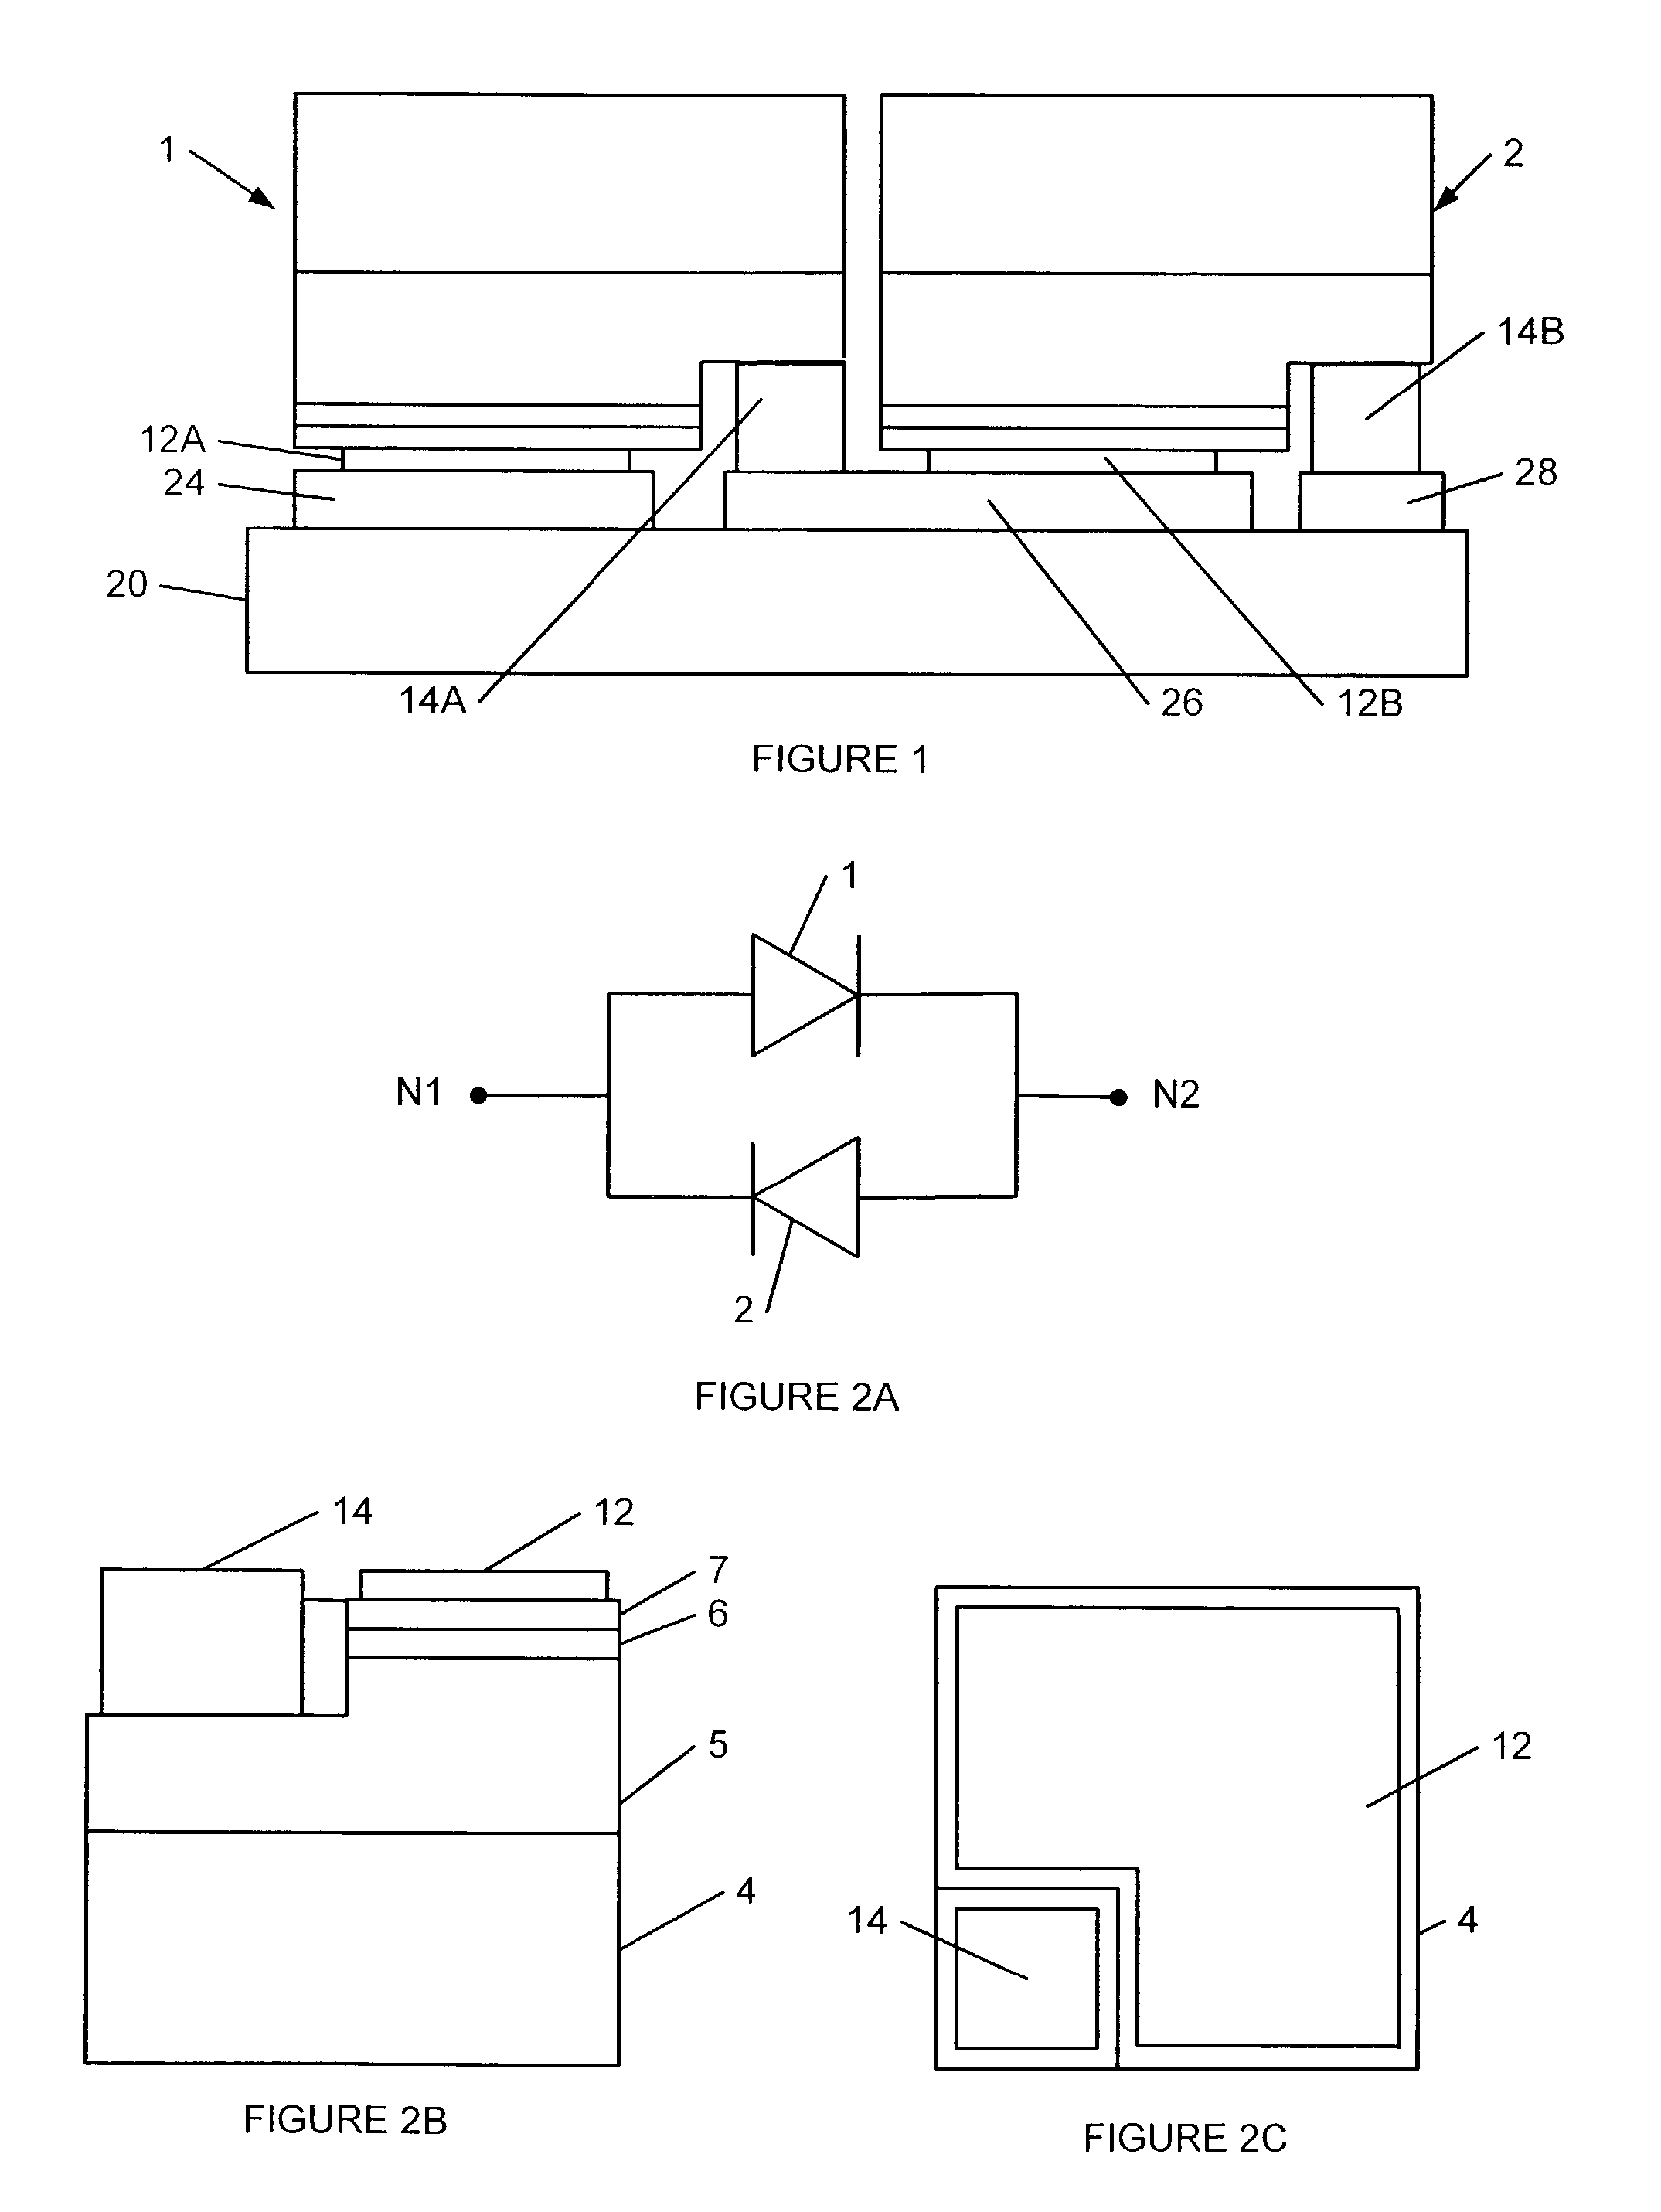 Electronic devices having a header and antiparallel connected light emitting diodes for producing light from AC current